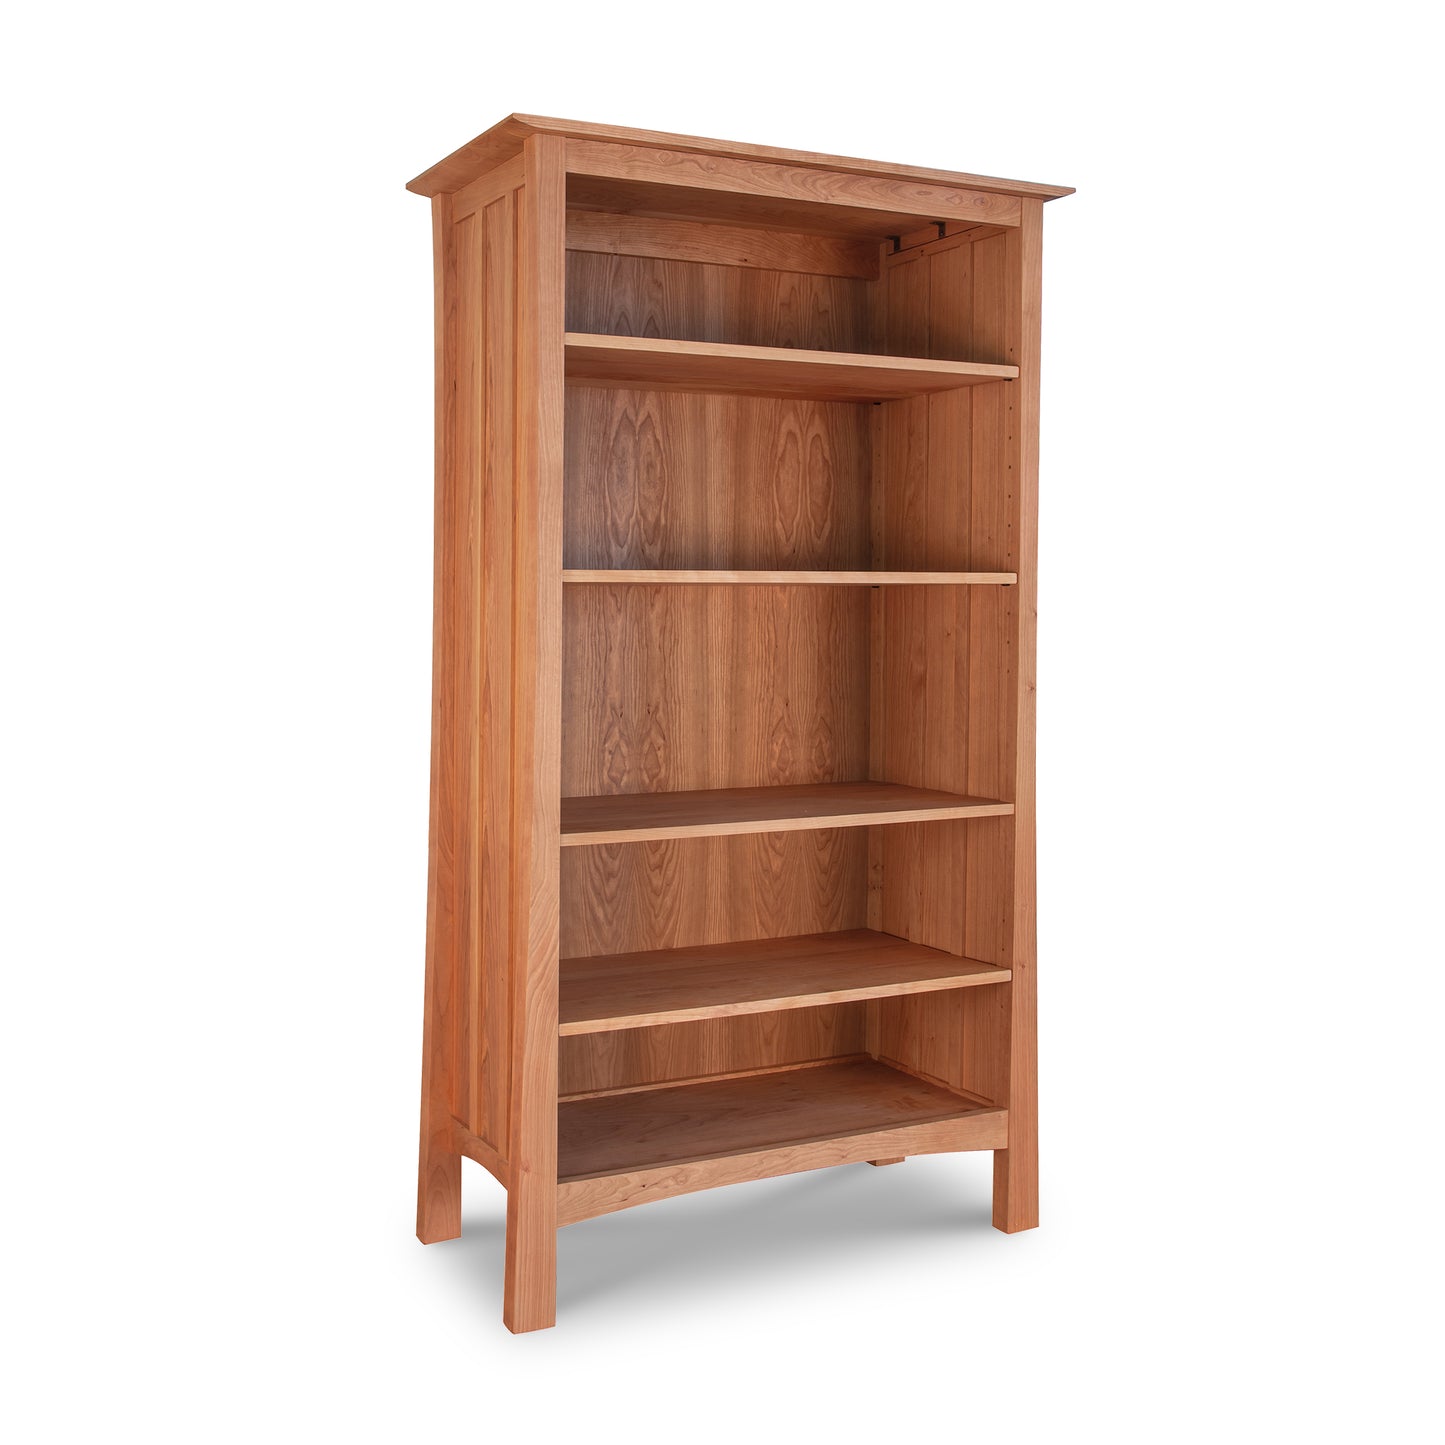 A Vermont Furniture Designs Contemporary Craftsman Custom Bookcase with four shelves, isolated on a white background.